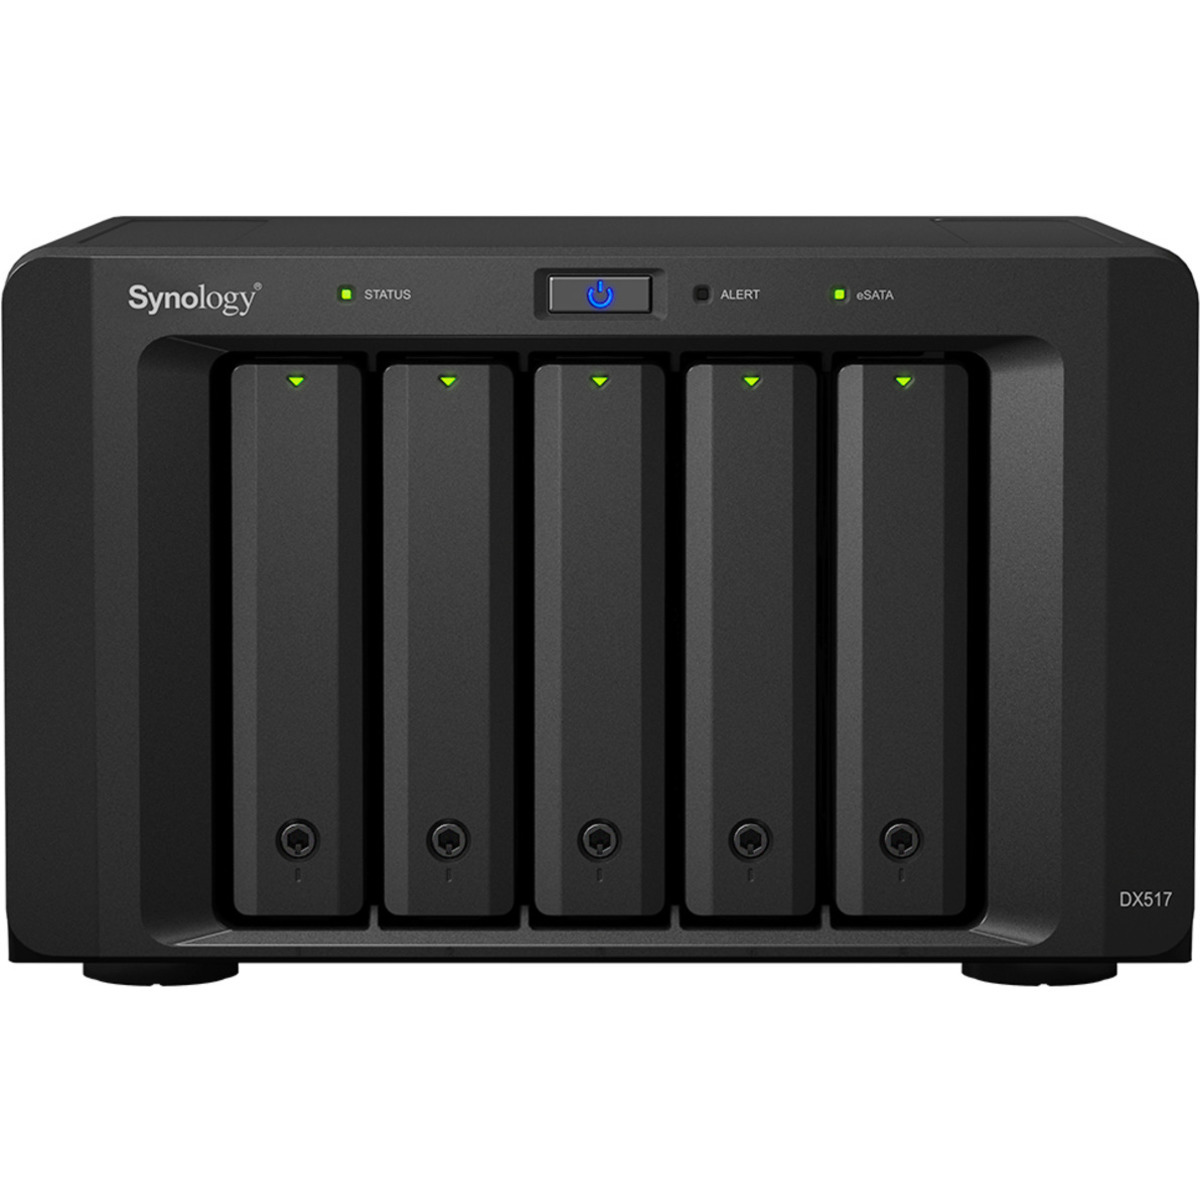 Synology DX517 External Expansion Drive 8tb 5-Bay Desktop Multimedia / Power User / Business Expansion Enclosure 4x2tb Crucial MX500 CT2000MX500SSD1 2.5 560/510MB/s SATA 6Gb/s SSD CONSUMER Class Drives Installed - Burn-In Tested DX517 External Expansion Drive